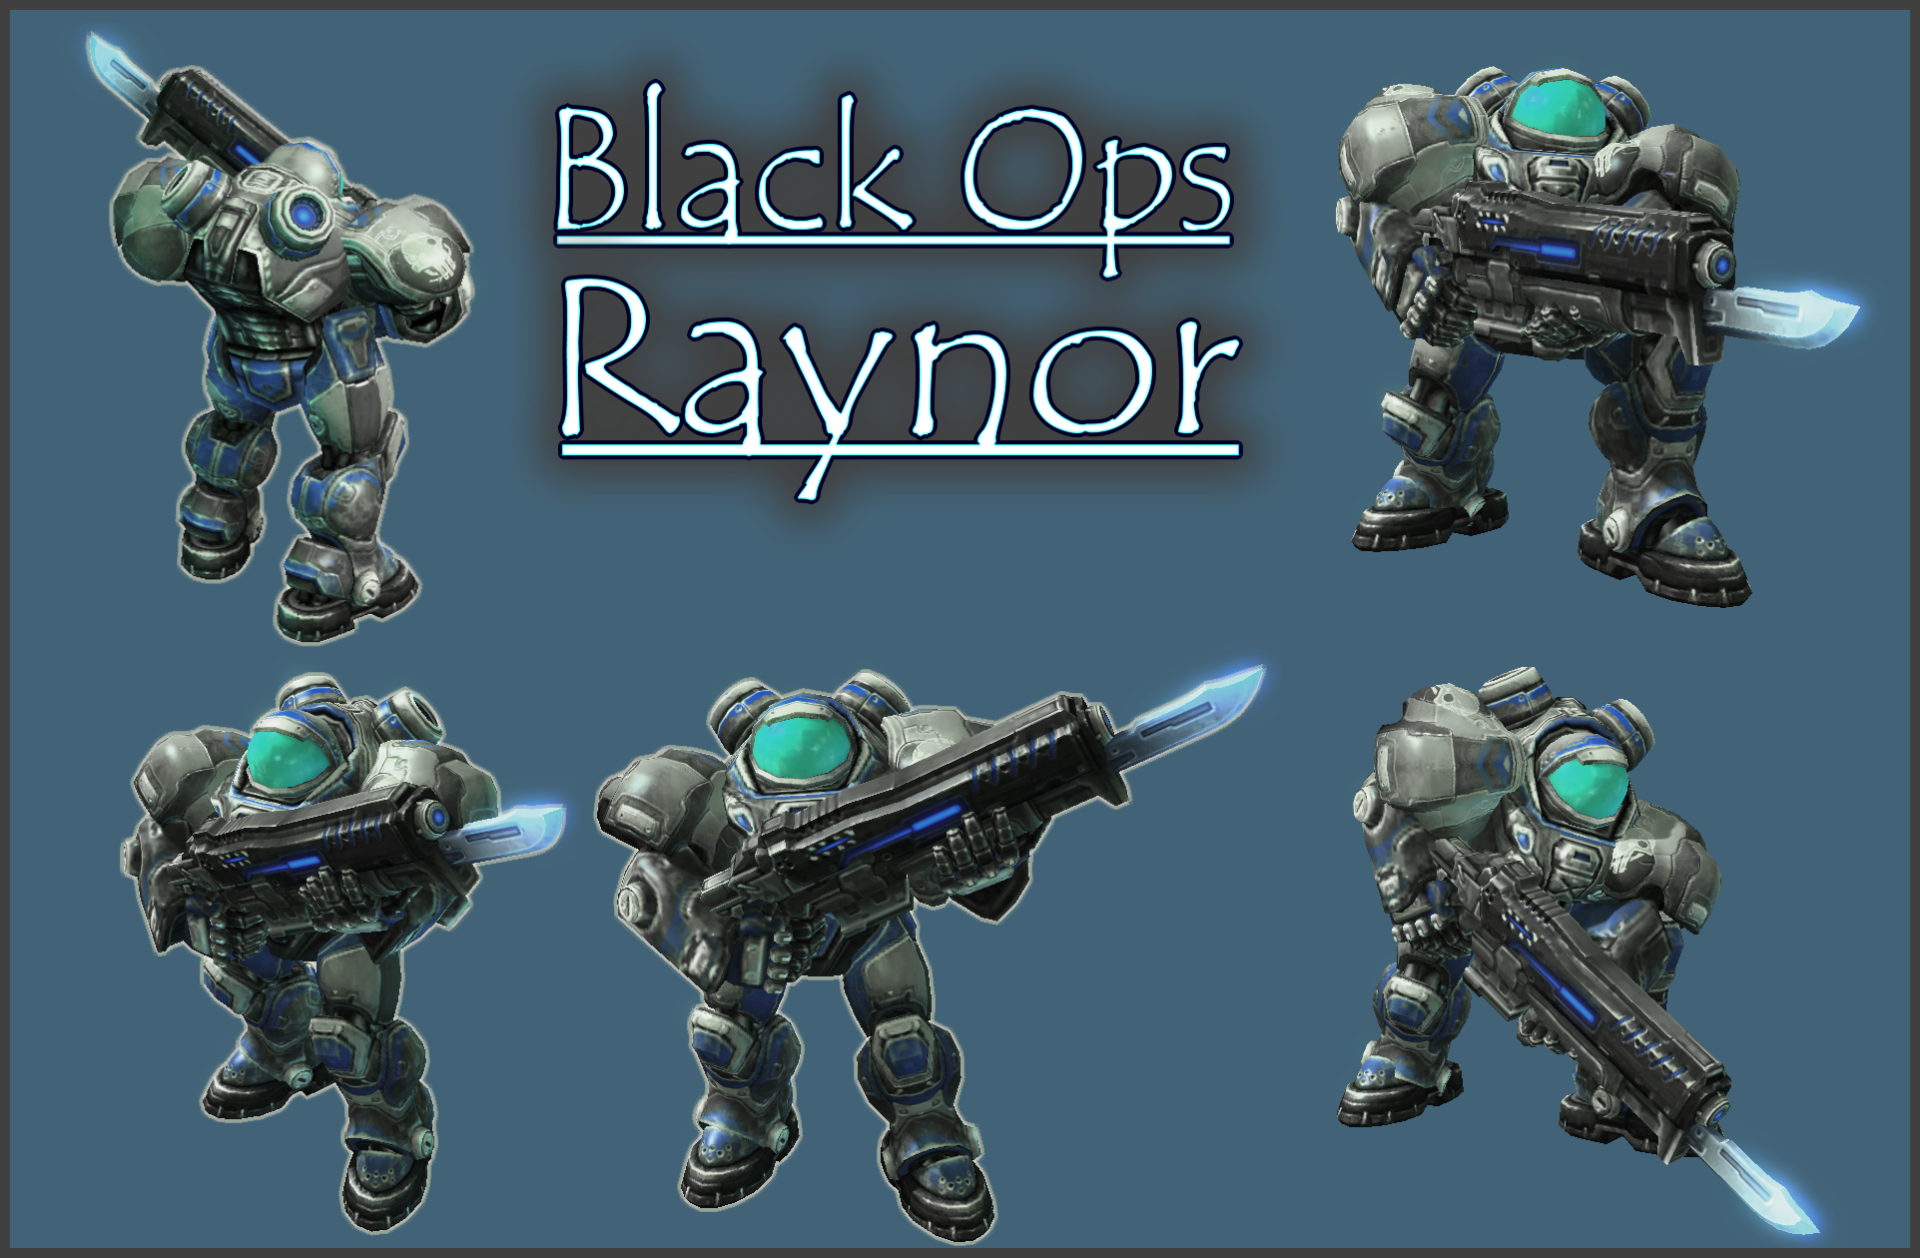 Black Ops Raynor